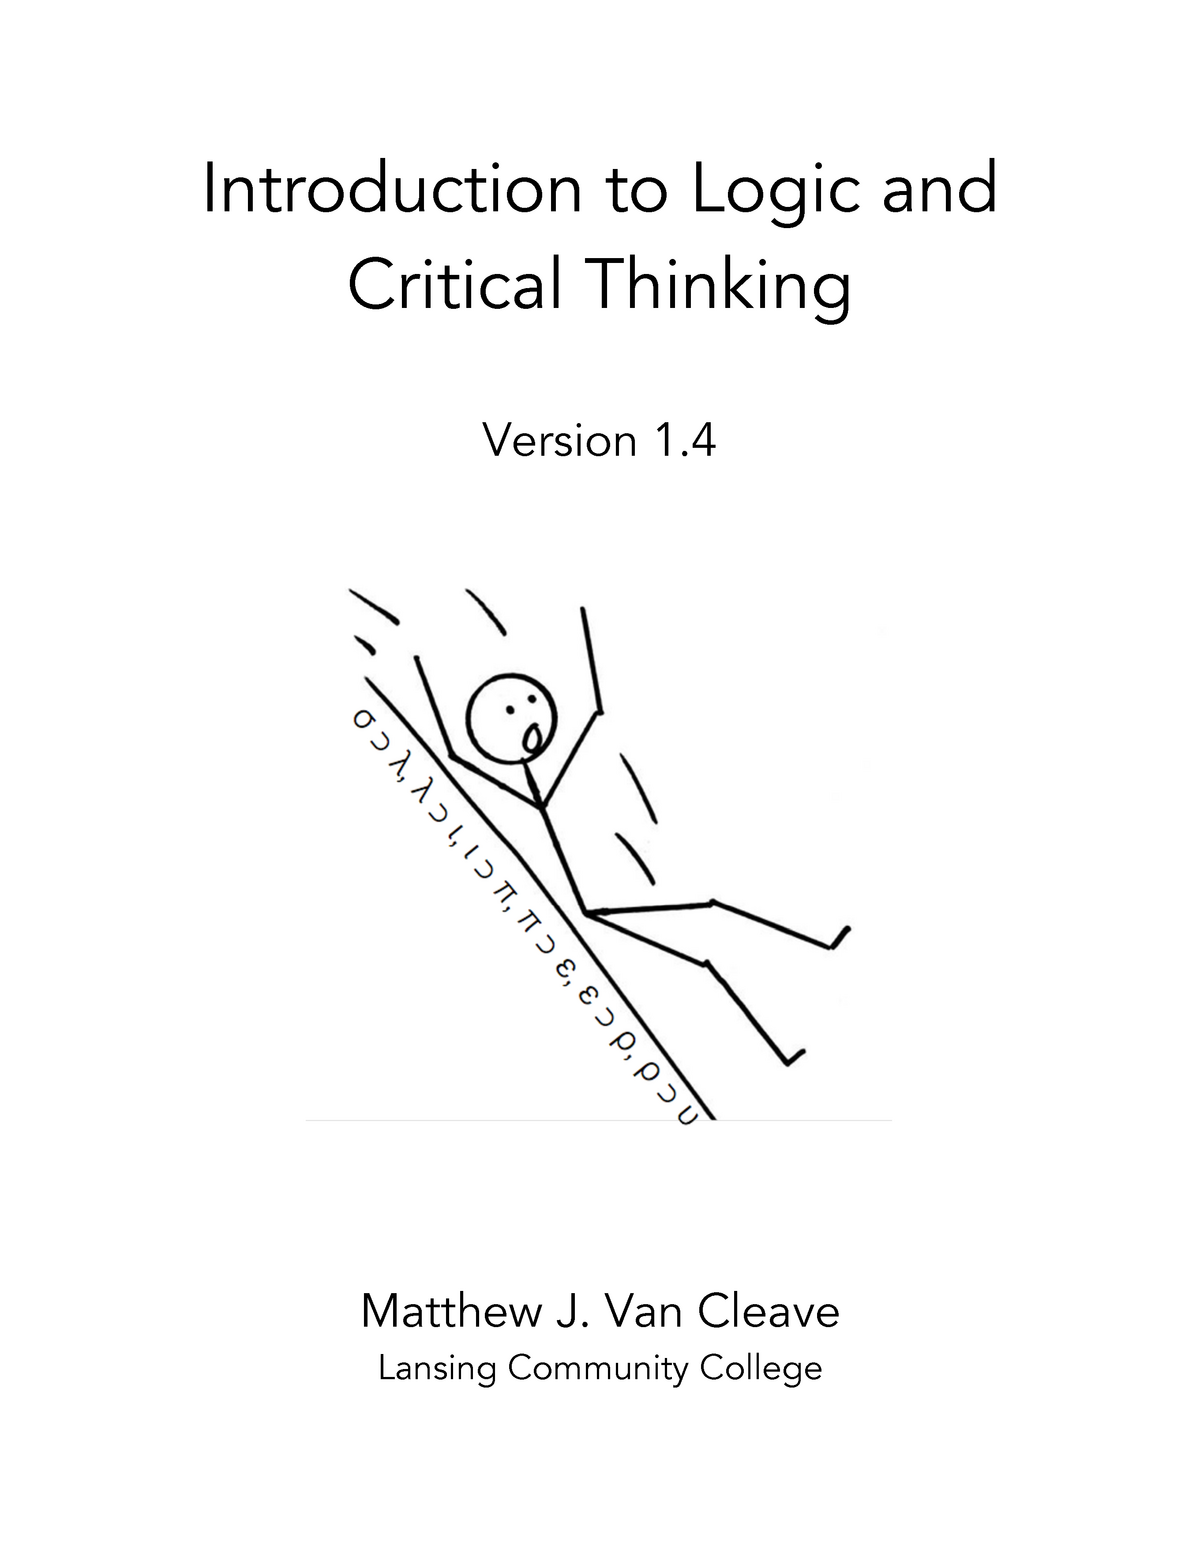 logic and critical thinking pdf free download